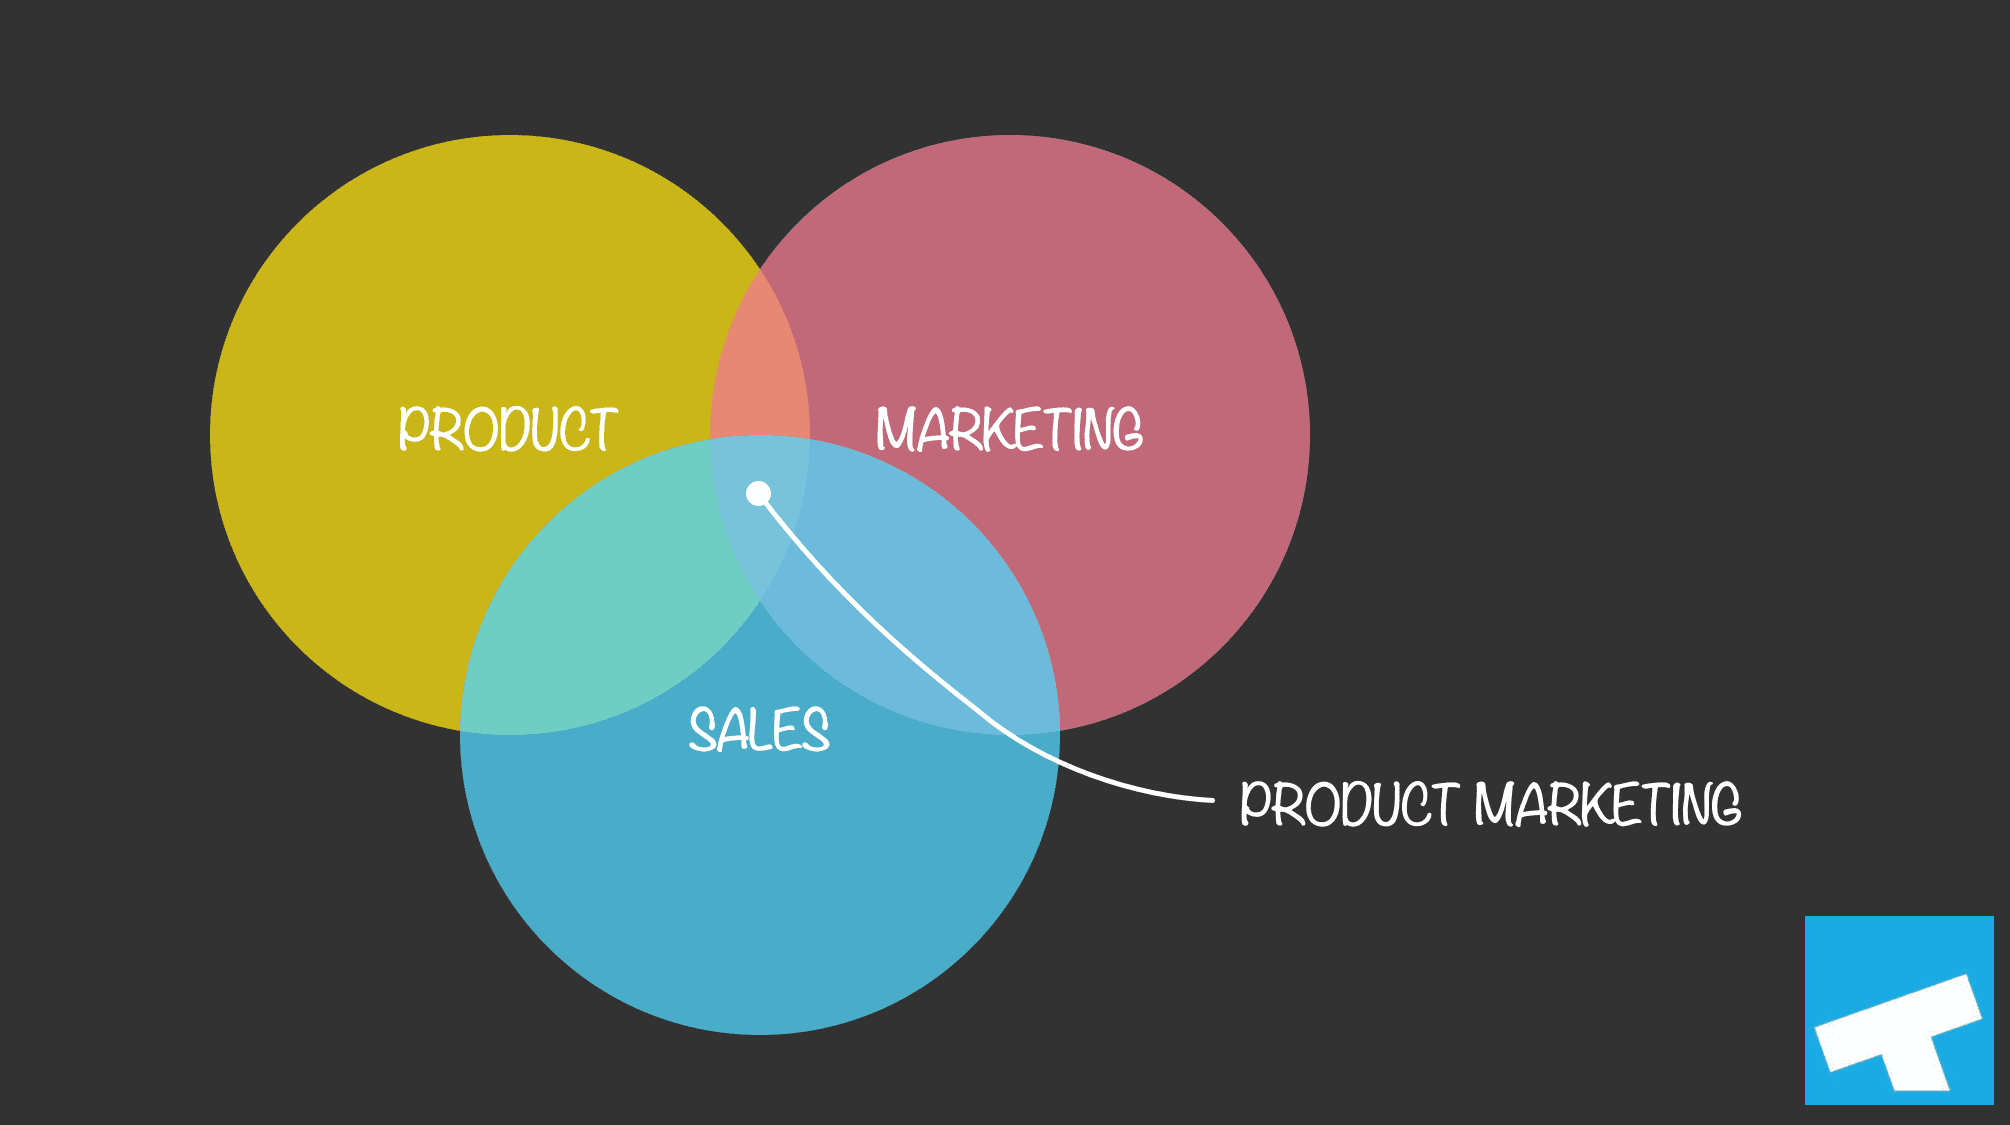 Product Marketing is at the Intersection of Product, Marketing, and Sales Organizations